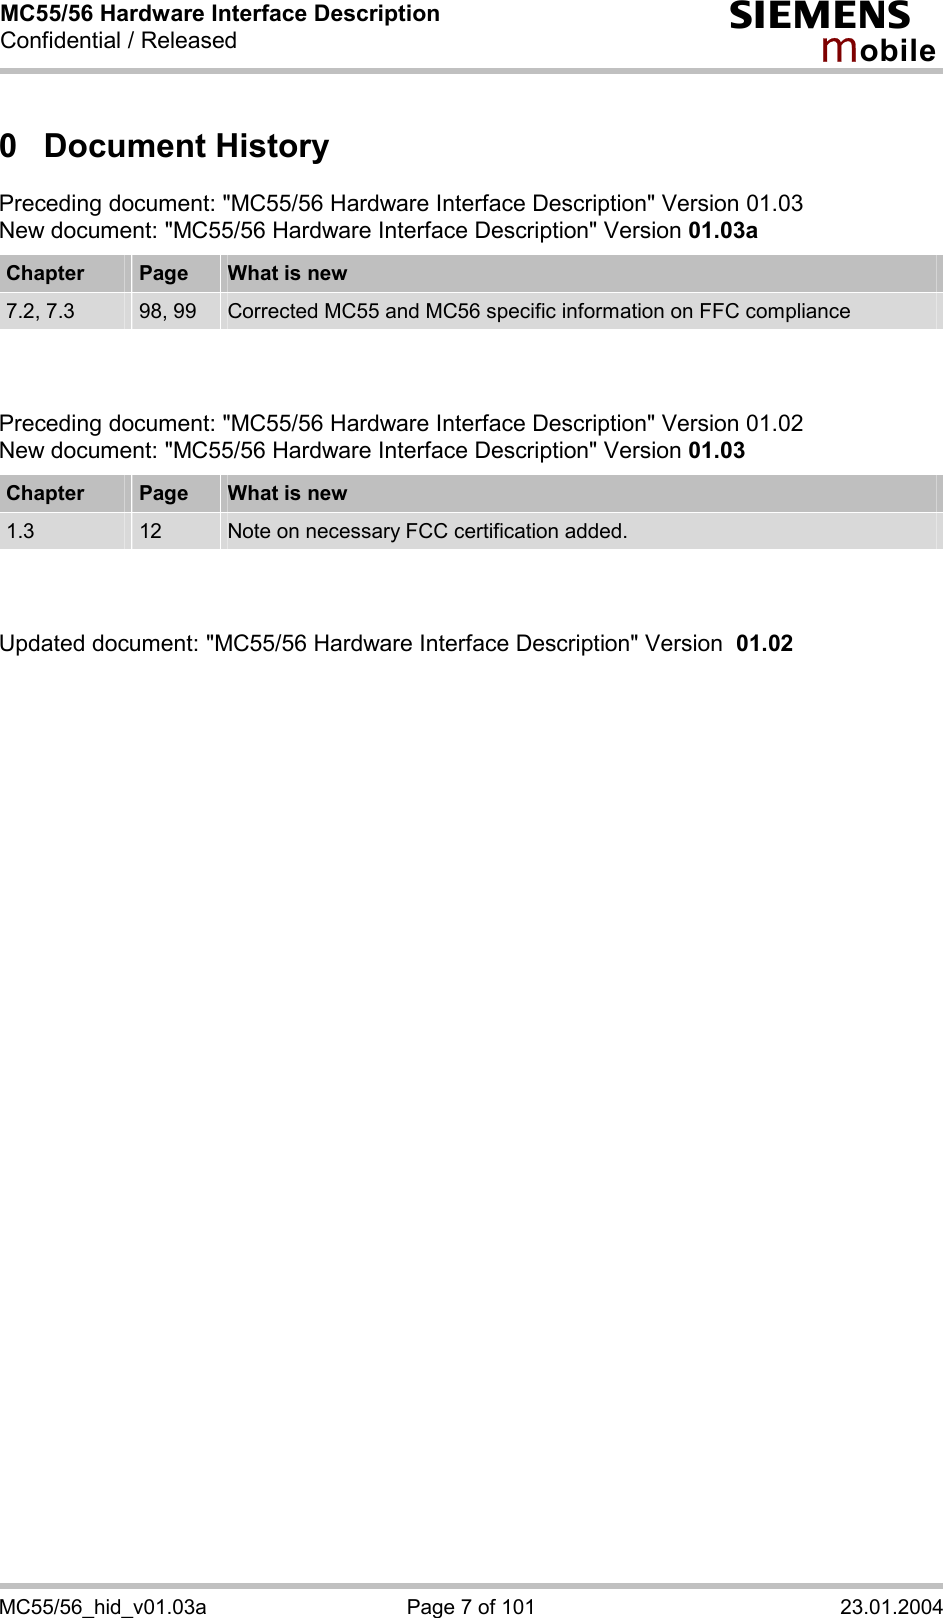 MC55/56 Hardware Interface Description Confidential / Released s mo b i l e MC55/56_hid_v01.03a  Page 7 of 101  23.01.2004 0 Document History Preceding document: &quot;MC55/56 Hardware Interface Description&quot; Version 01.03 New document: &quot;MC55/56 Hardware Interface Description&quot; Version 01.03a  Chapter  Page  What is new 7.2, 7.3  98, 99  Corrected MC55 and MC56 specific information on FFC compliance    Preceding document: &quot;MC55/56 Hardware Interface Description&quot; Version 01.02 New document: &quot;MC55/56 Hardware Interface Description&quot; Version 01.03  Chapter  Page  What is new 1.3  12  Note on necessary FCC certification added.    Updated document: &quot;MC55/56 Hardware Interface Description&quot; Version  01.02   